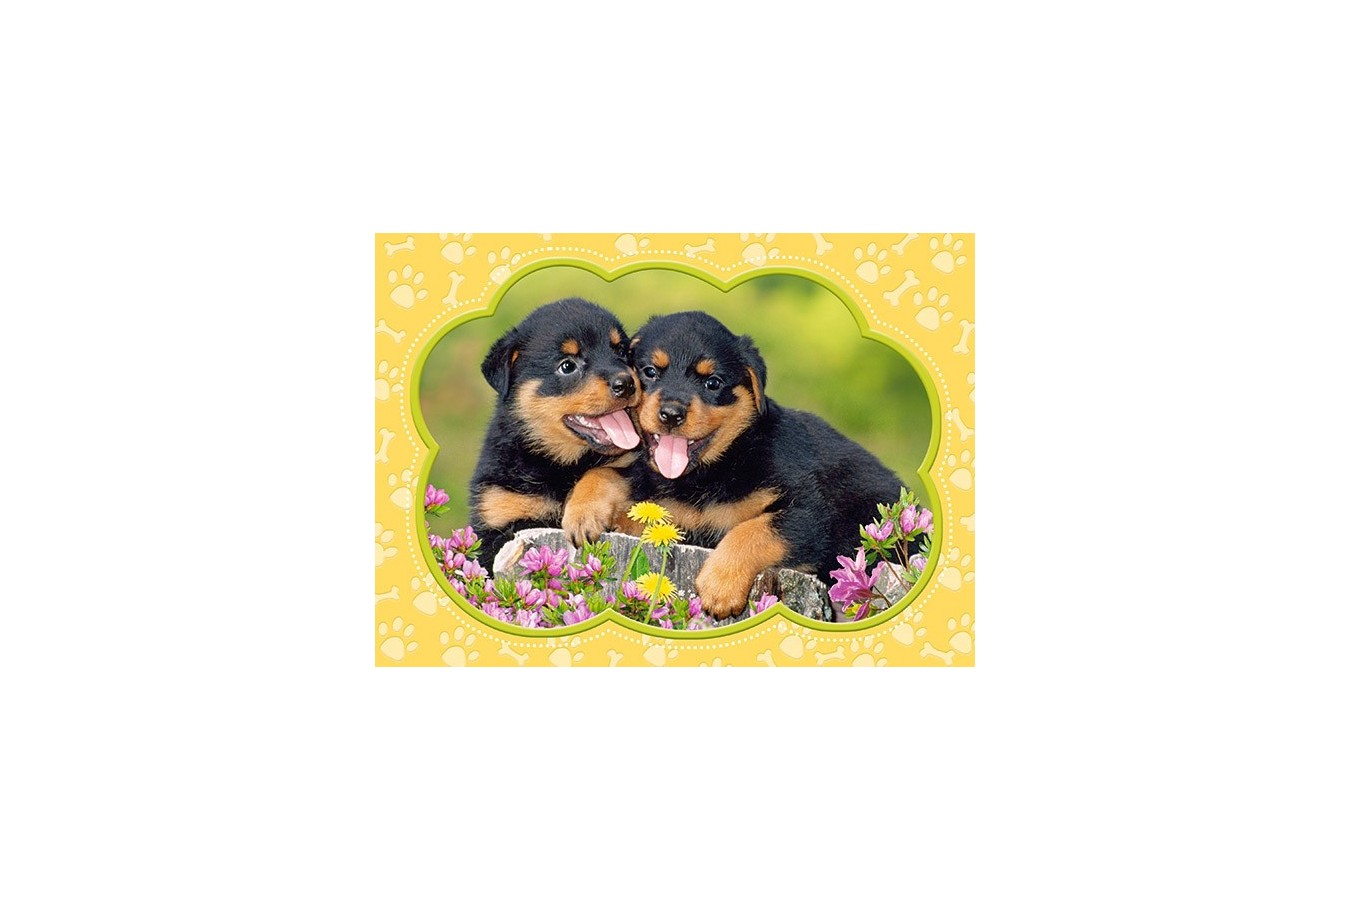 Puzzle Castorland - Little Rotweillers, 35 Piese